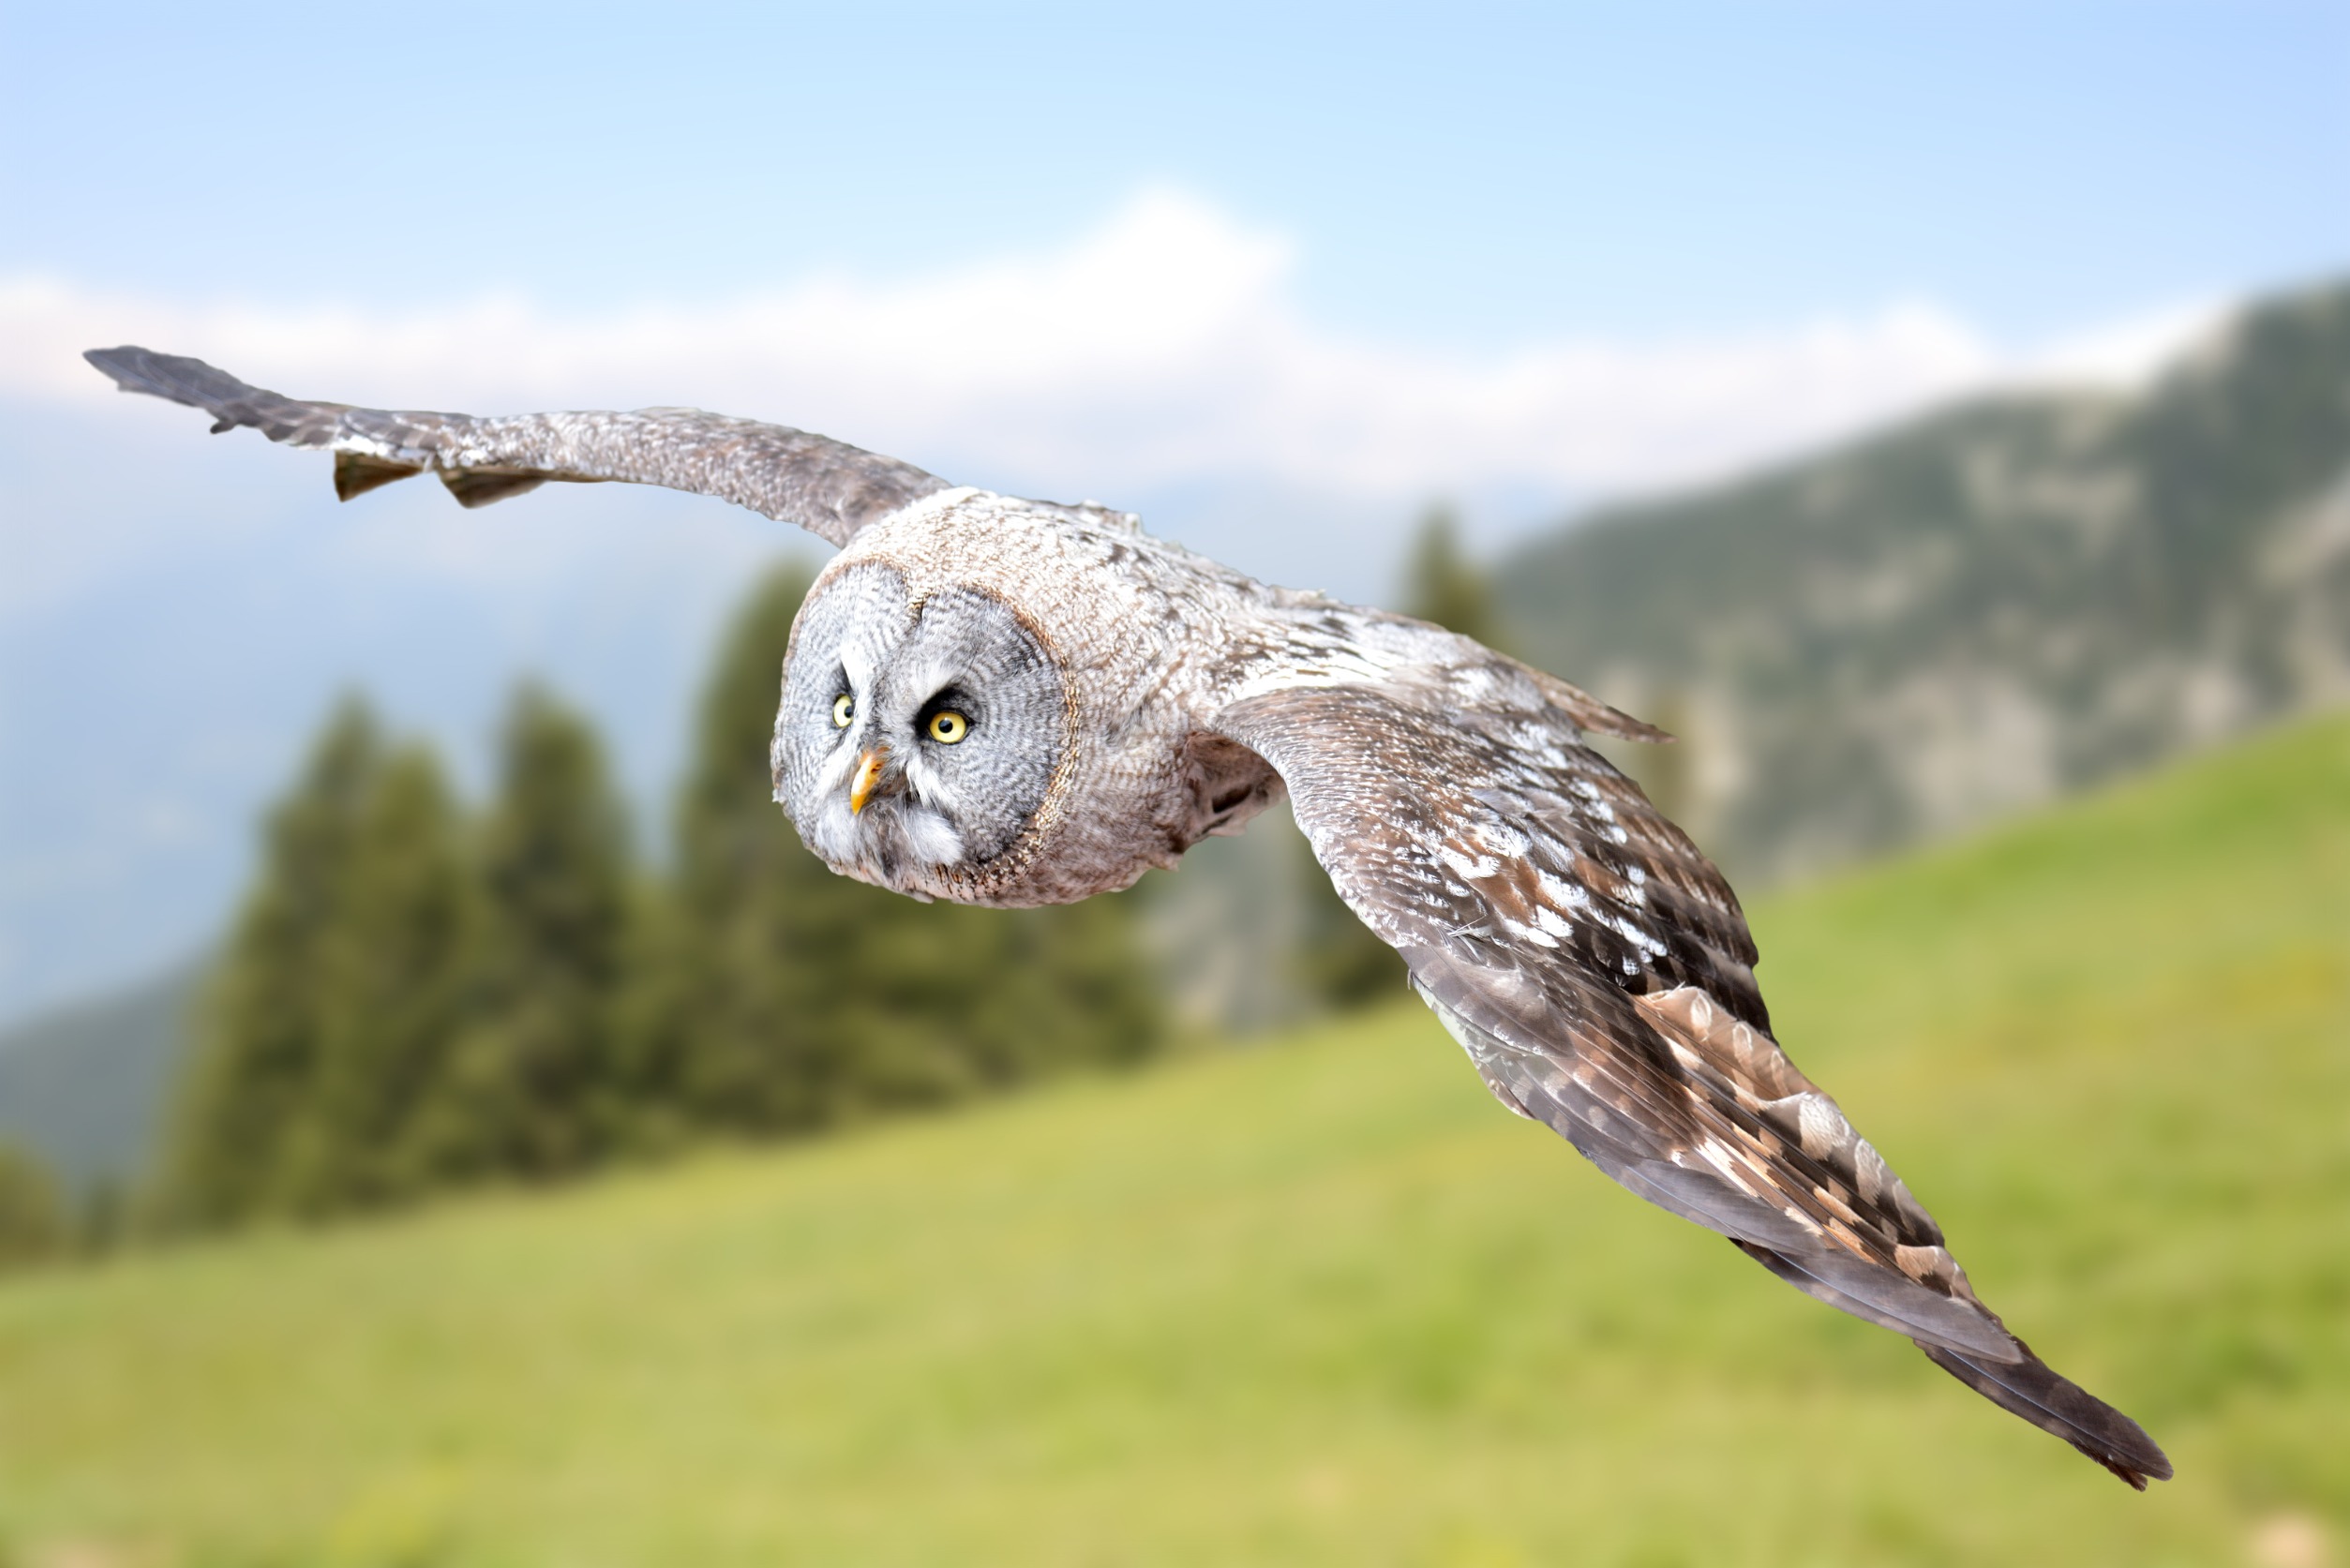 White and brown owl flying over a mountainside (blurred background), symbolizing content experts soaring after you hire a content strategist.